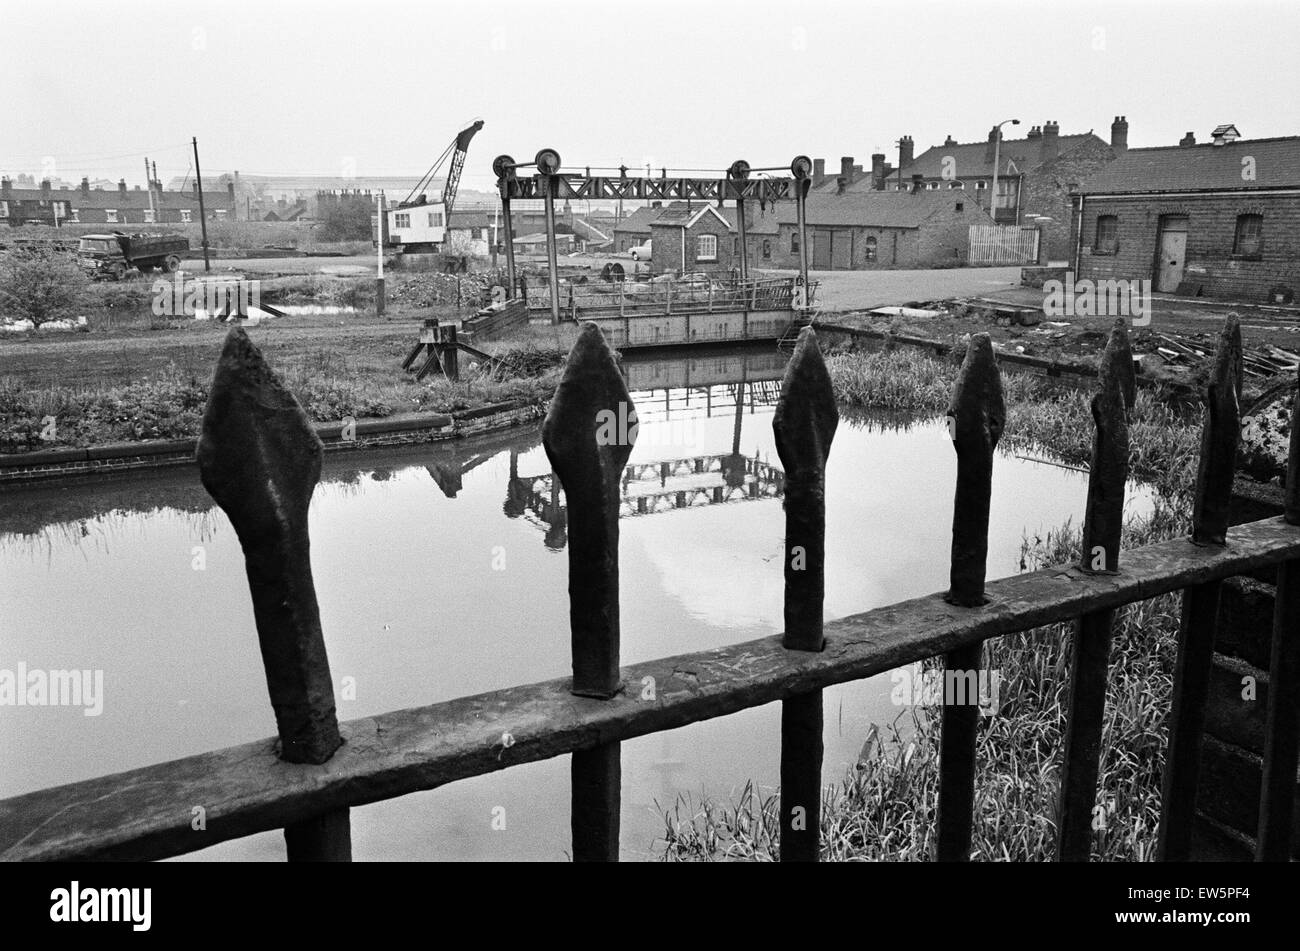 Railings, blackened by 150 years of industrial smoke separate the weed grown banks of the Birmingham Wolverhampton Canal at Factory Locks, Tipton, from a railway coalyard. In the centre is an unusual mid 19th century lifting bridge over the U bend of the Stock Photo